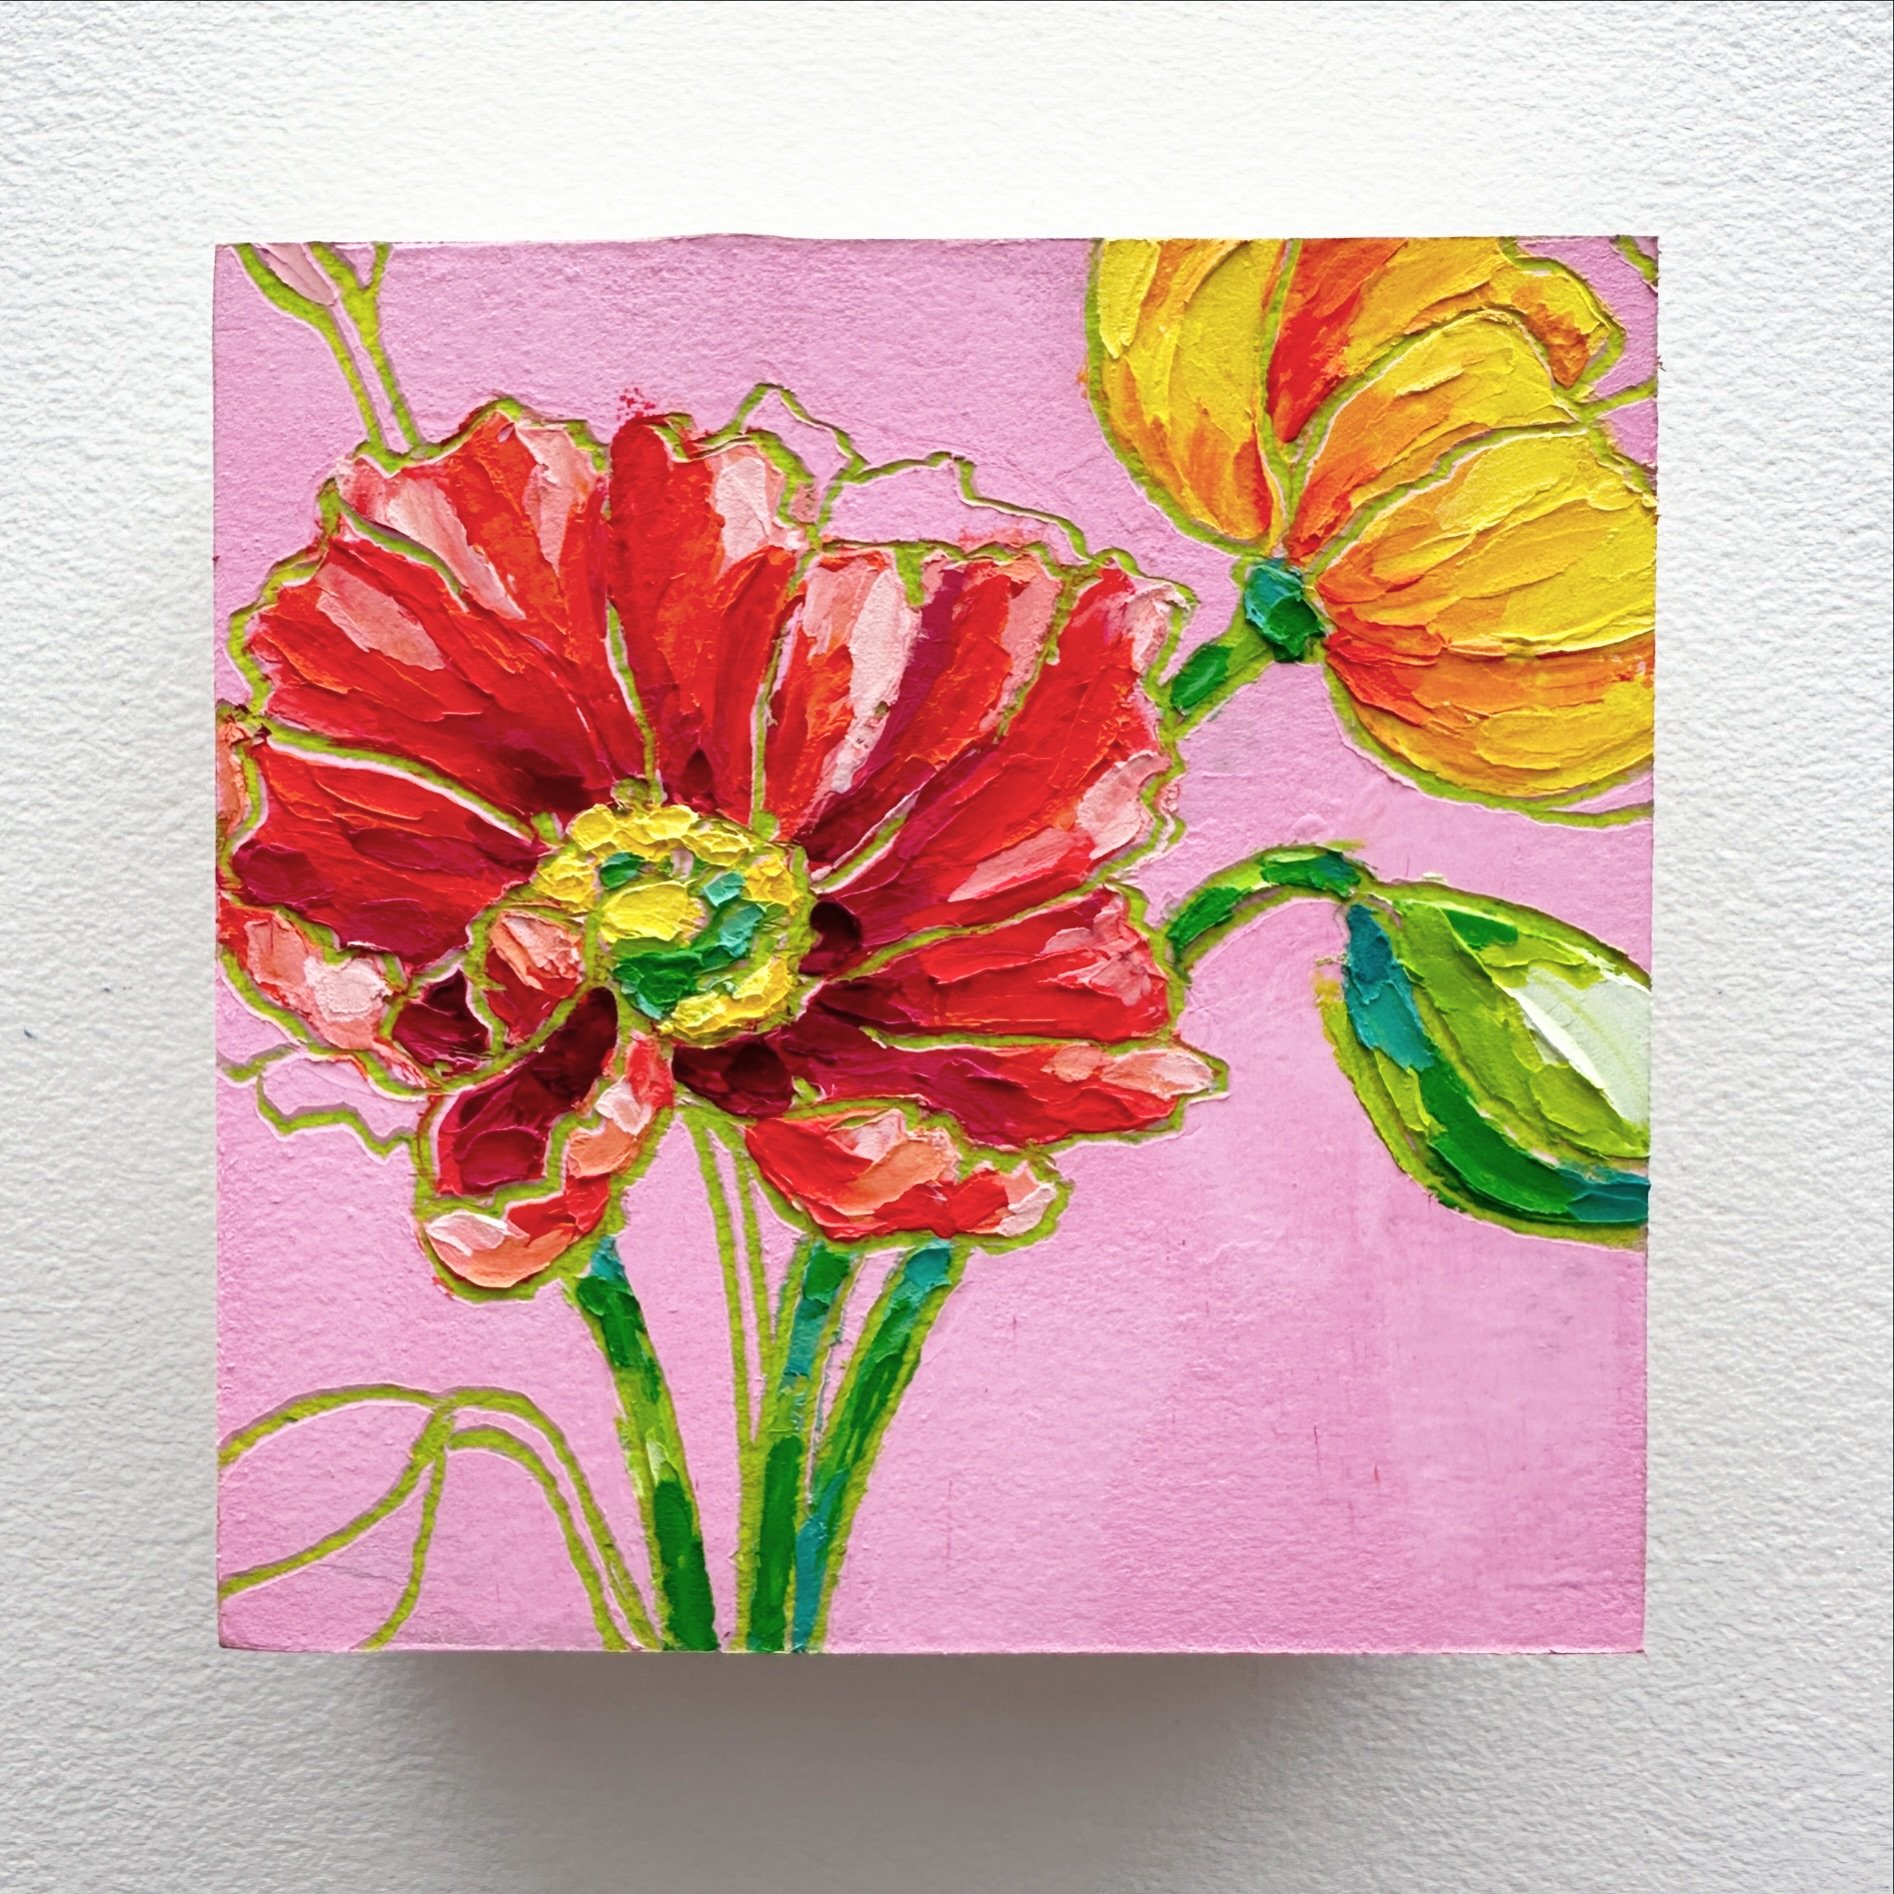 Day 48, The 100 Day Project 2024 @dothe100dayproject

Poppies and pink. Finally someone was first with the poppy suggestion!! I could paint 1,000 poppy paintings and never tire of them. Well, maybe I would throw in a peony or two here and there. 

Fo